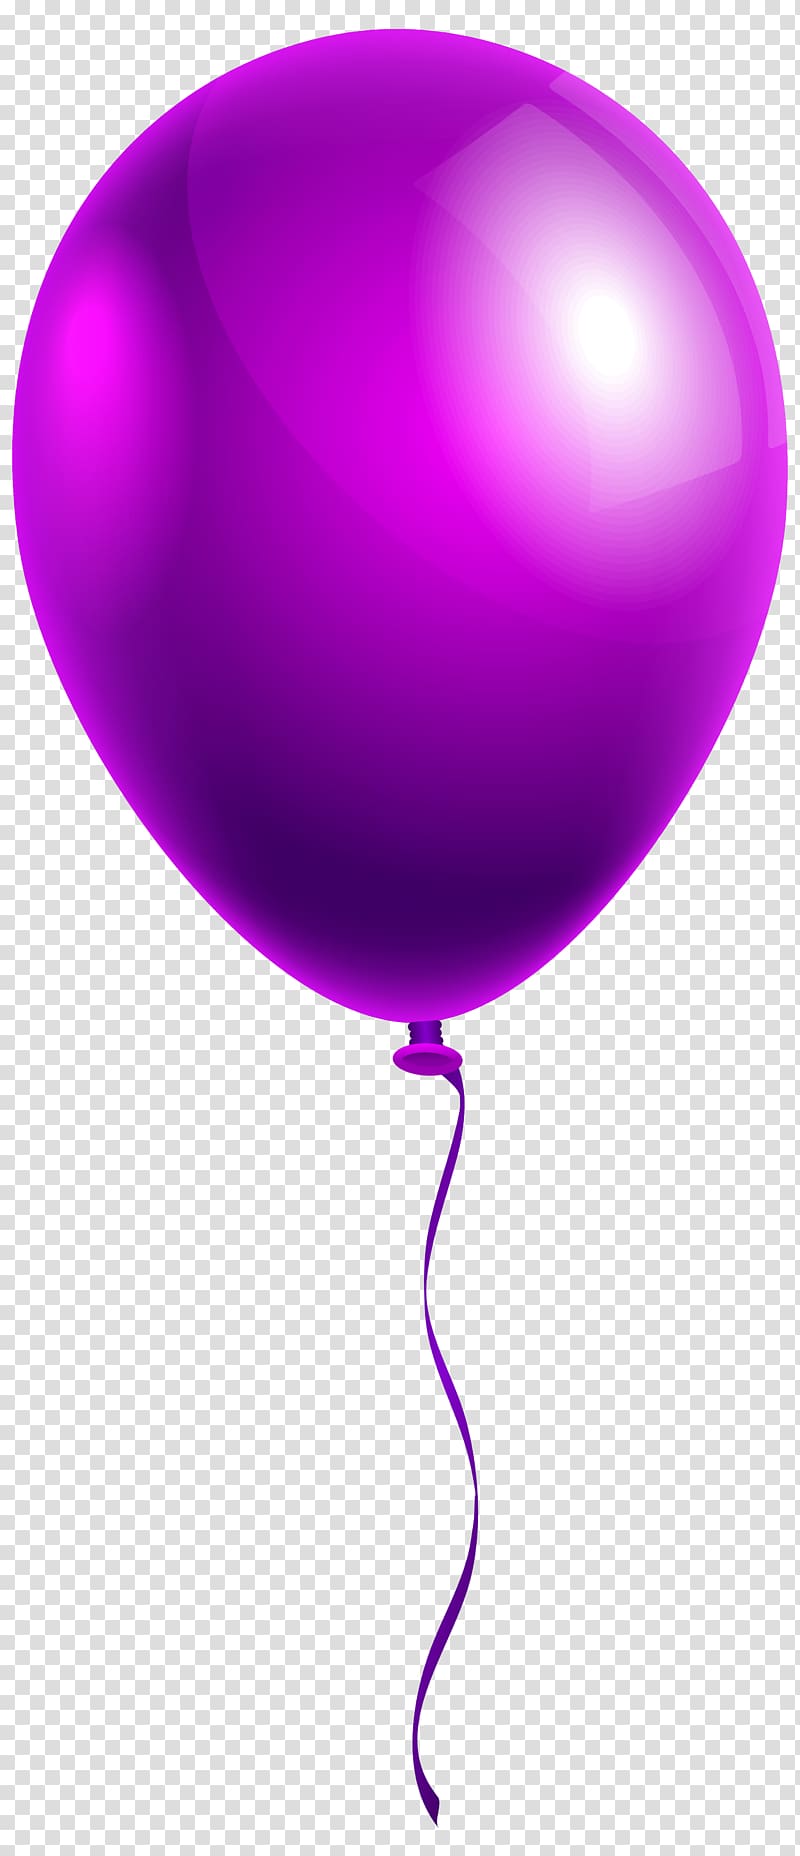 Balloon , Single Purple Balloon , purple balloon transparent background PNG clipart